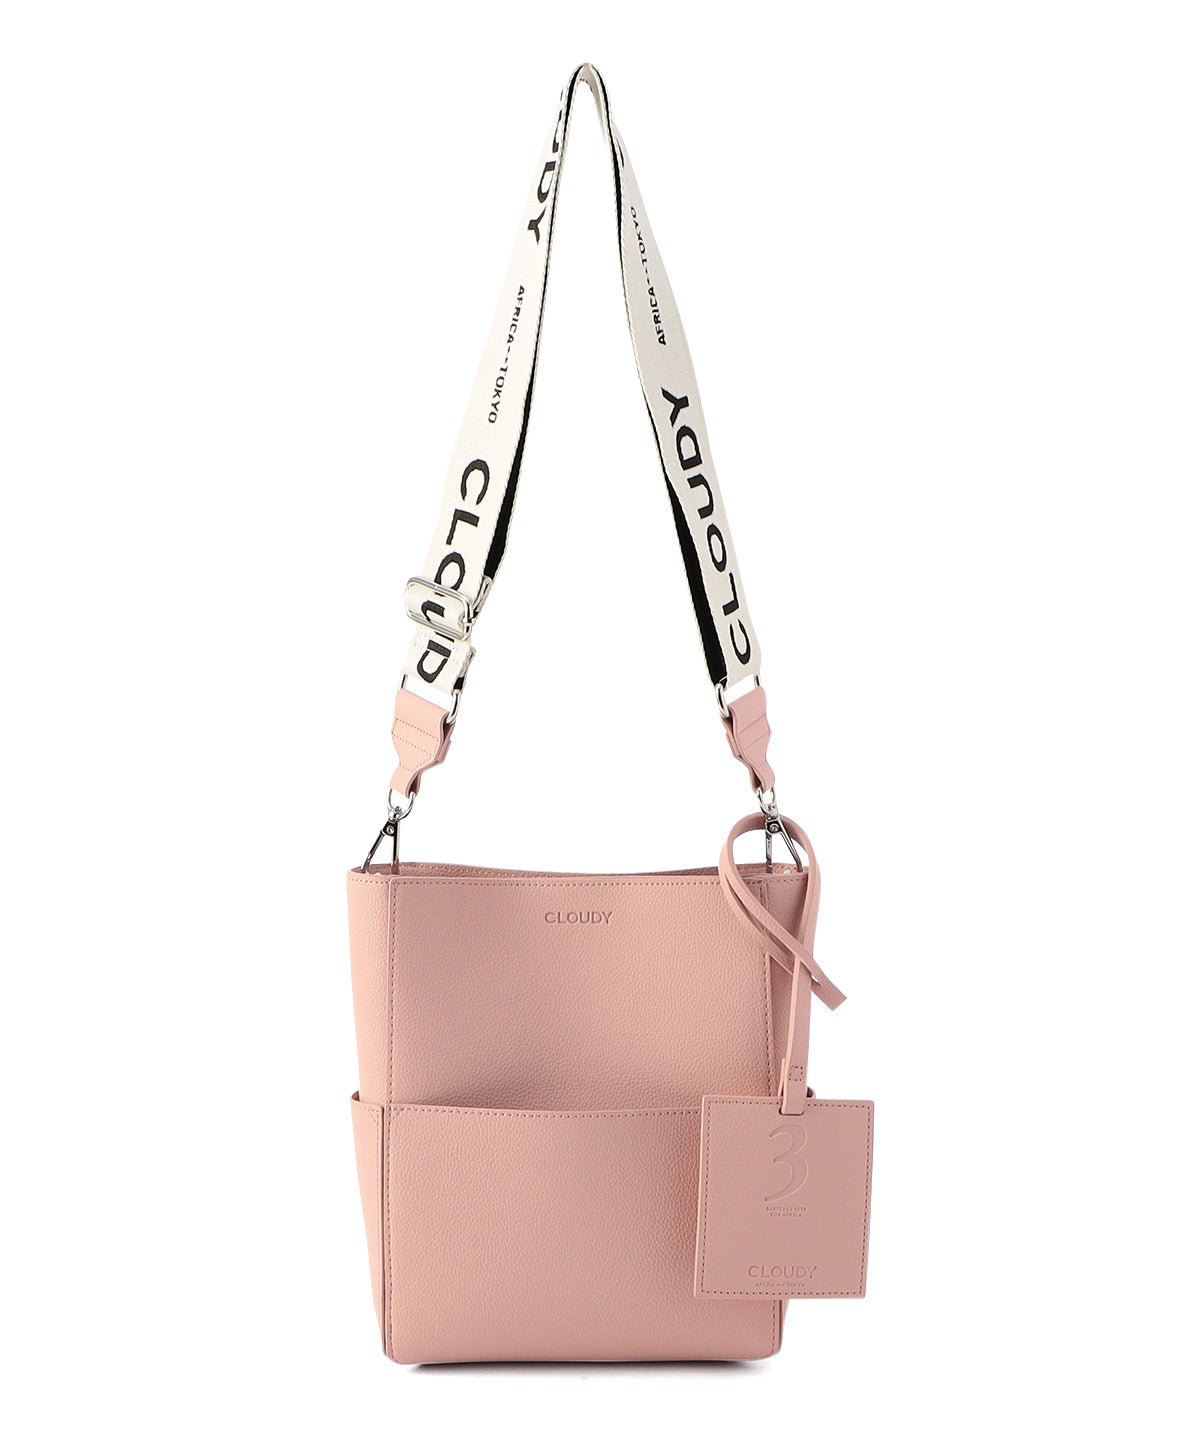 Logo Shoulder bag (Small) PINKBEIGE | バッグ | CLOUDY公式通販サイト